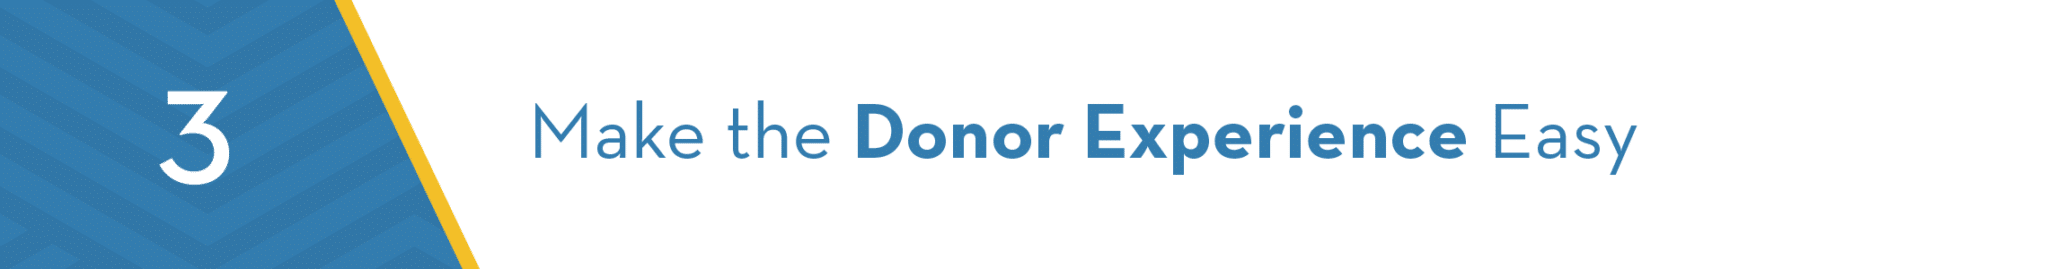 3-make-the-donor-experience-easy